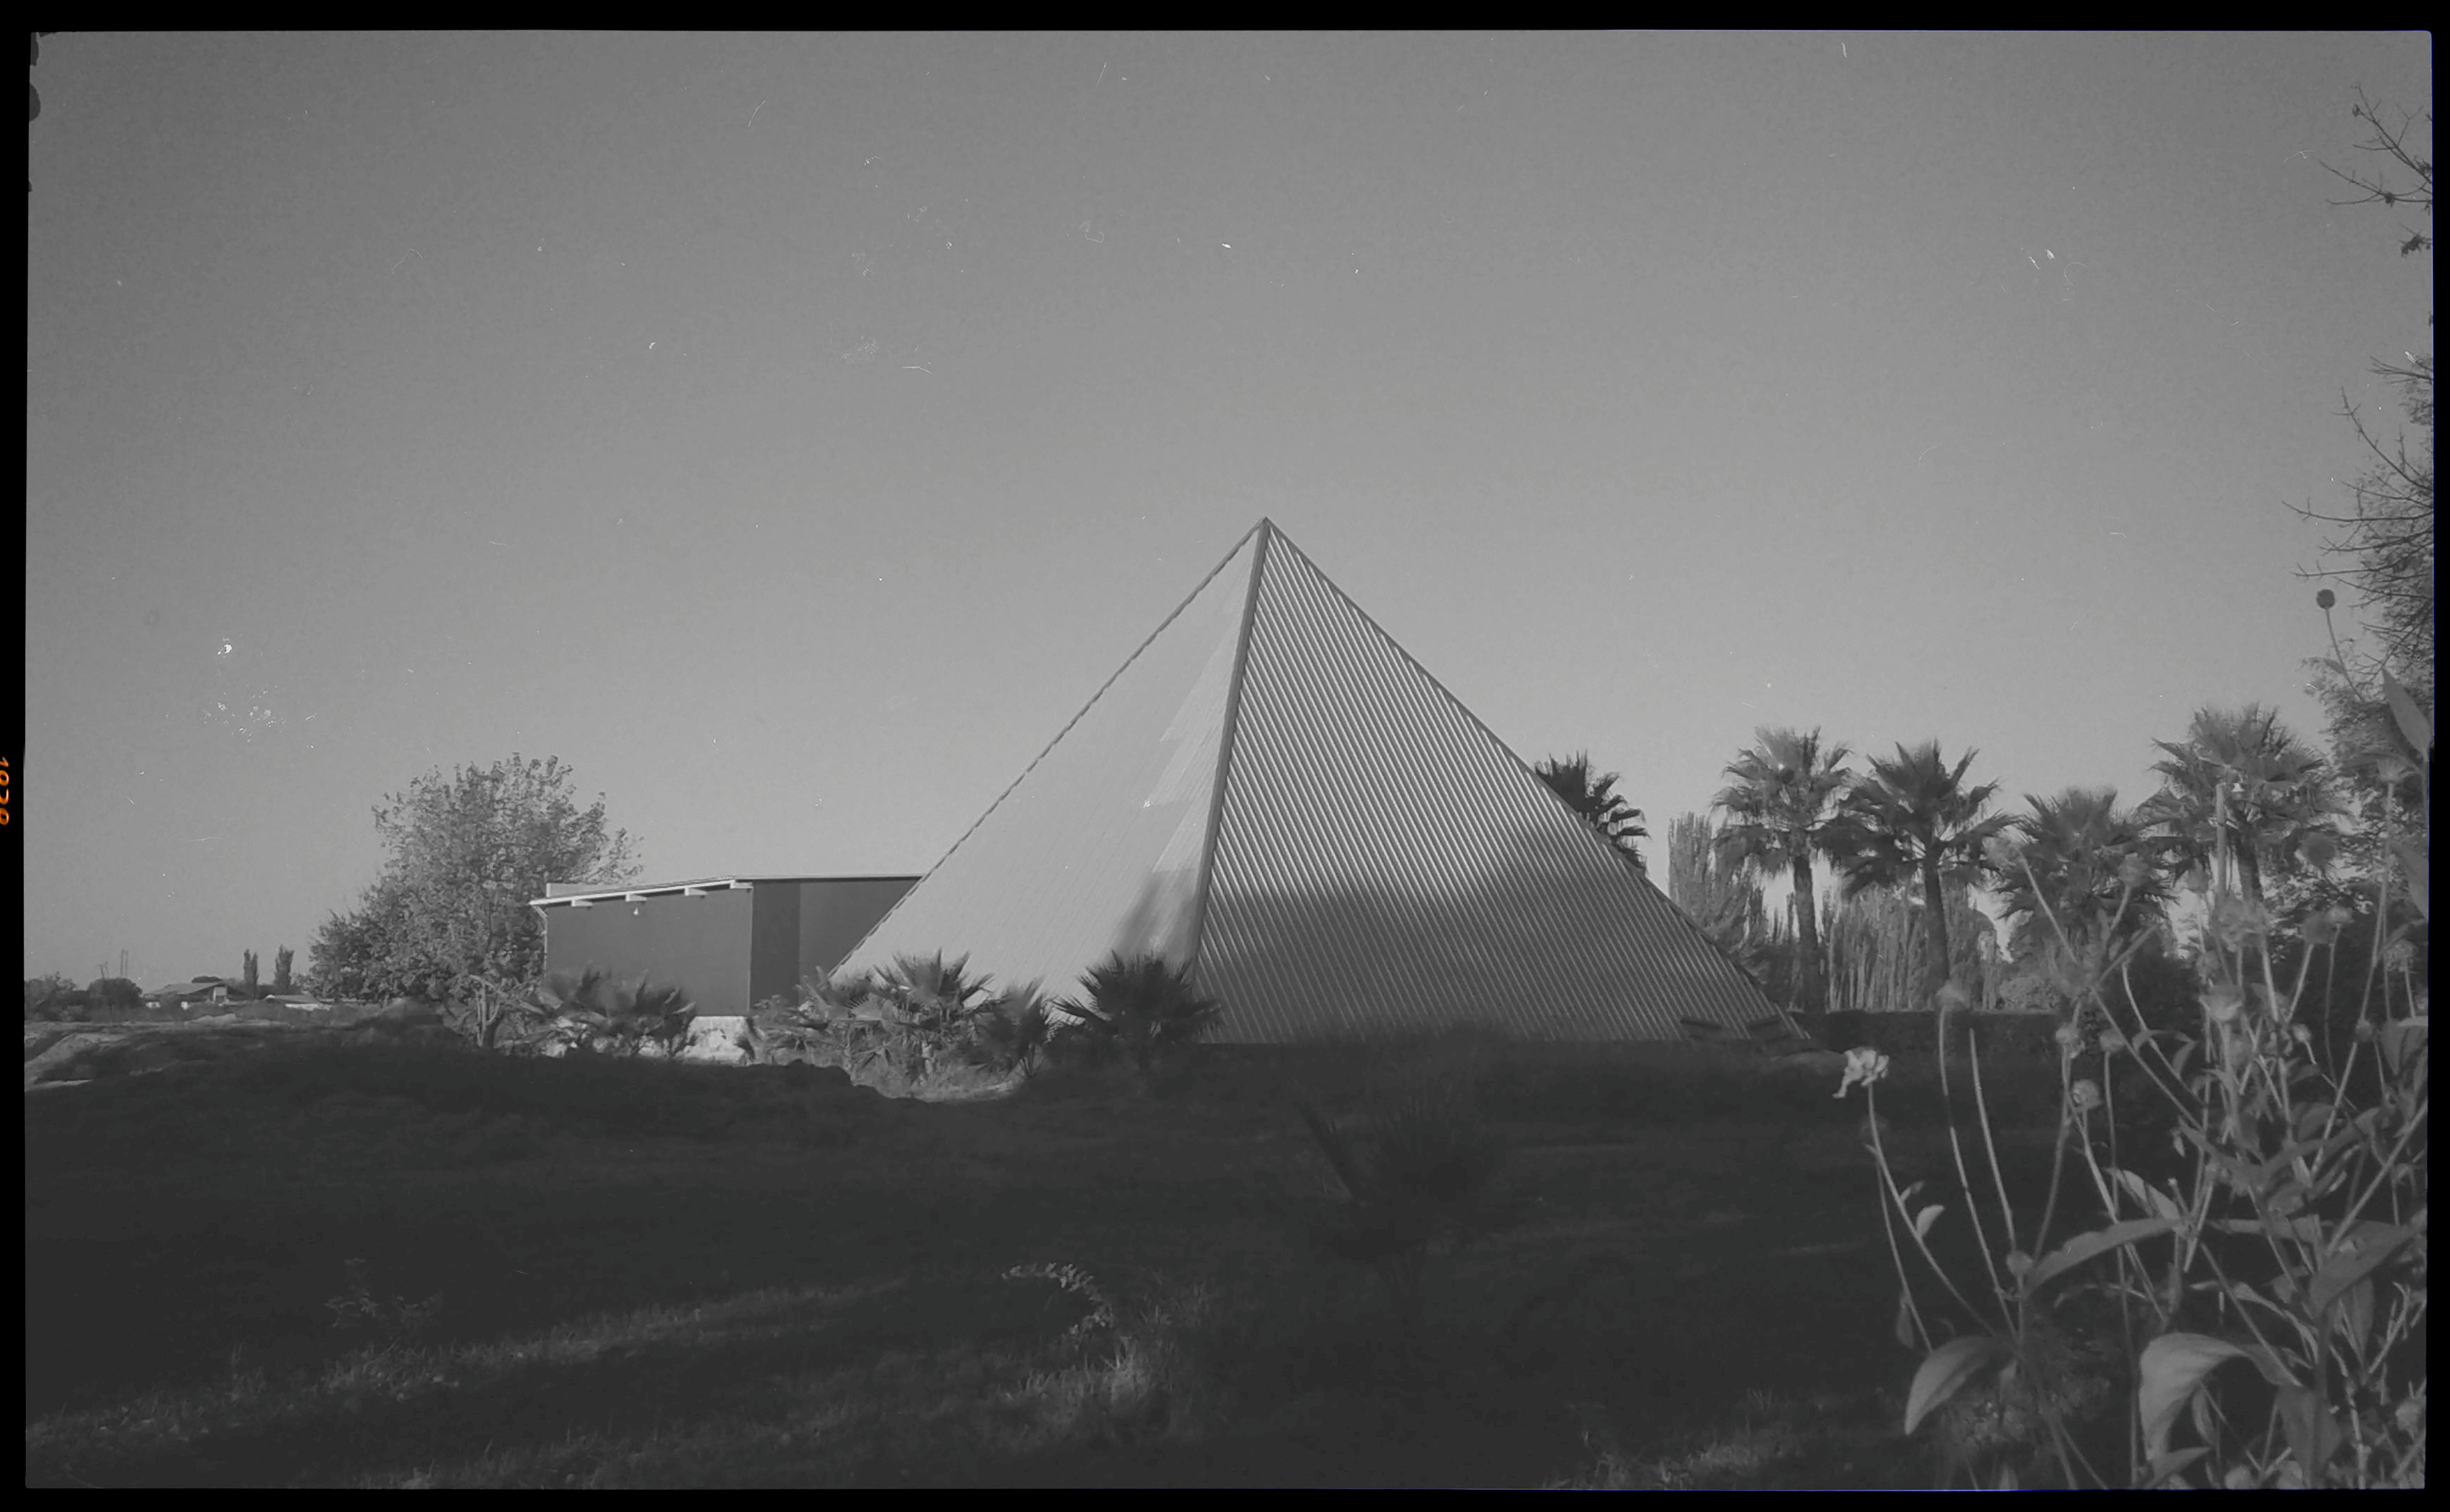 Pyramid in Countryside in Black and White